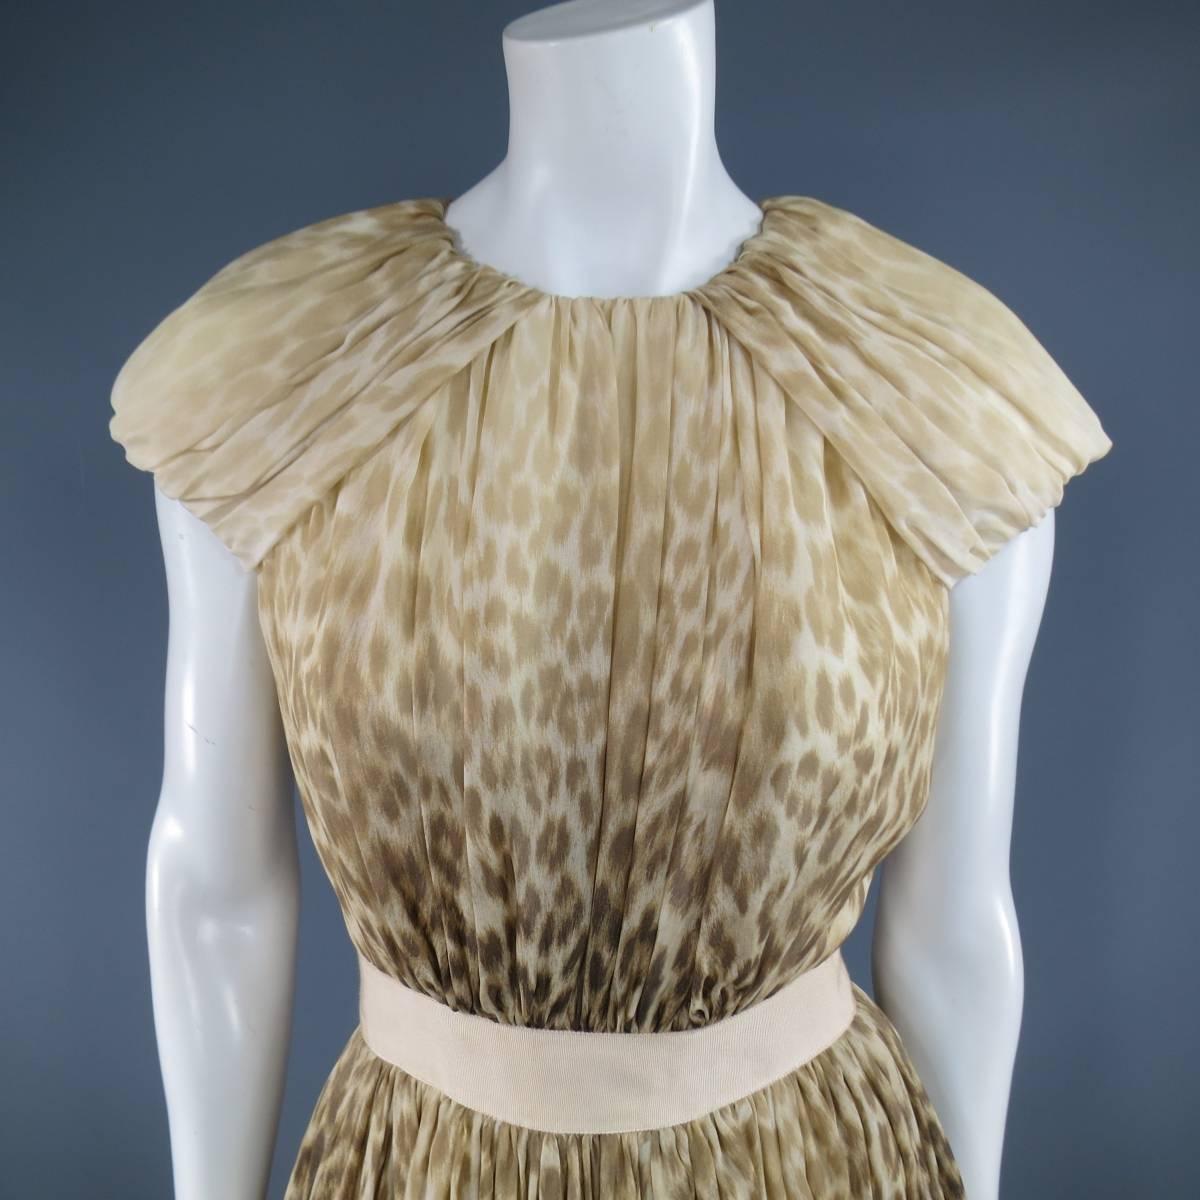 This stunning Giambattista Valli Couture cocktail dress comes in a beige and brown gradient ombre leopard cheetah stretch silk chiffon and features a gathered bodice, gathered shoulder panels, peachy beige ribbon waistband, and soft pleated A line